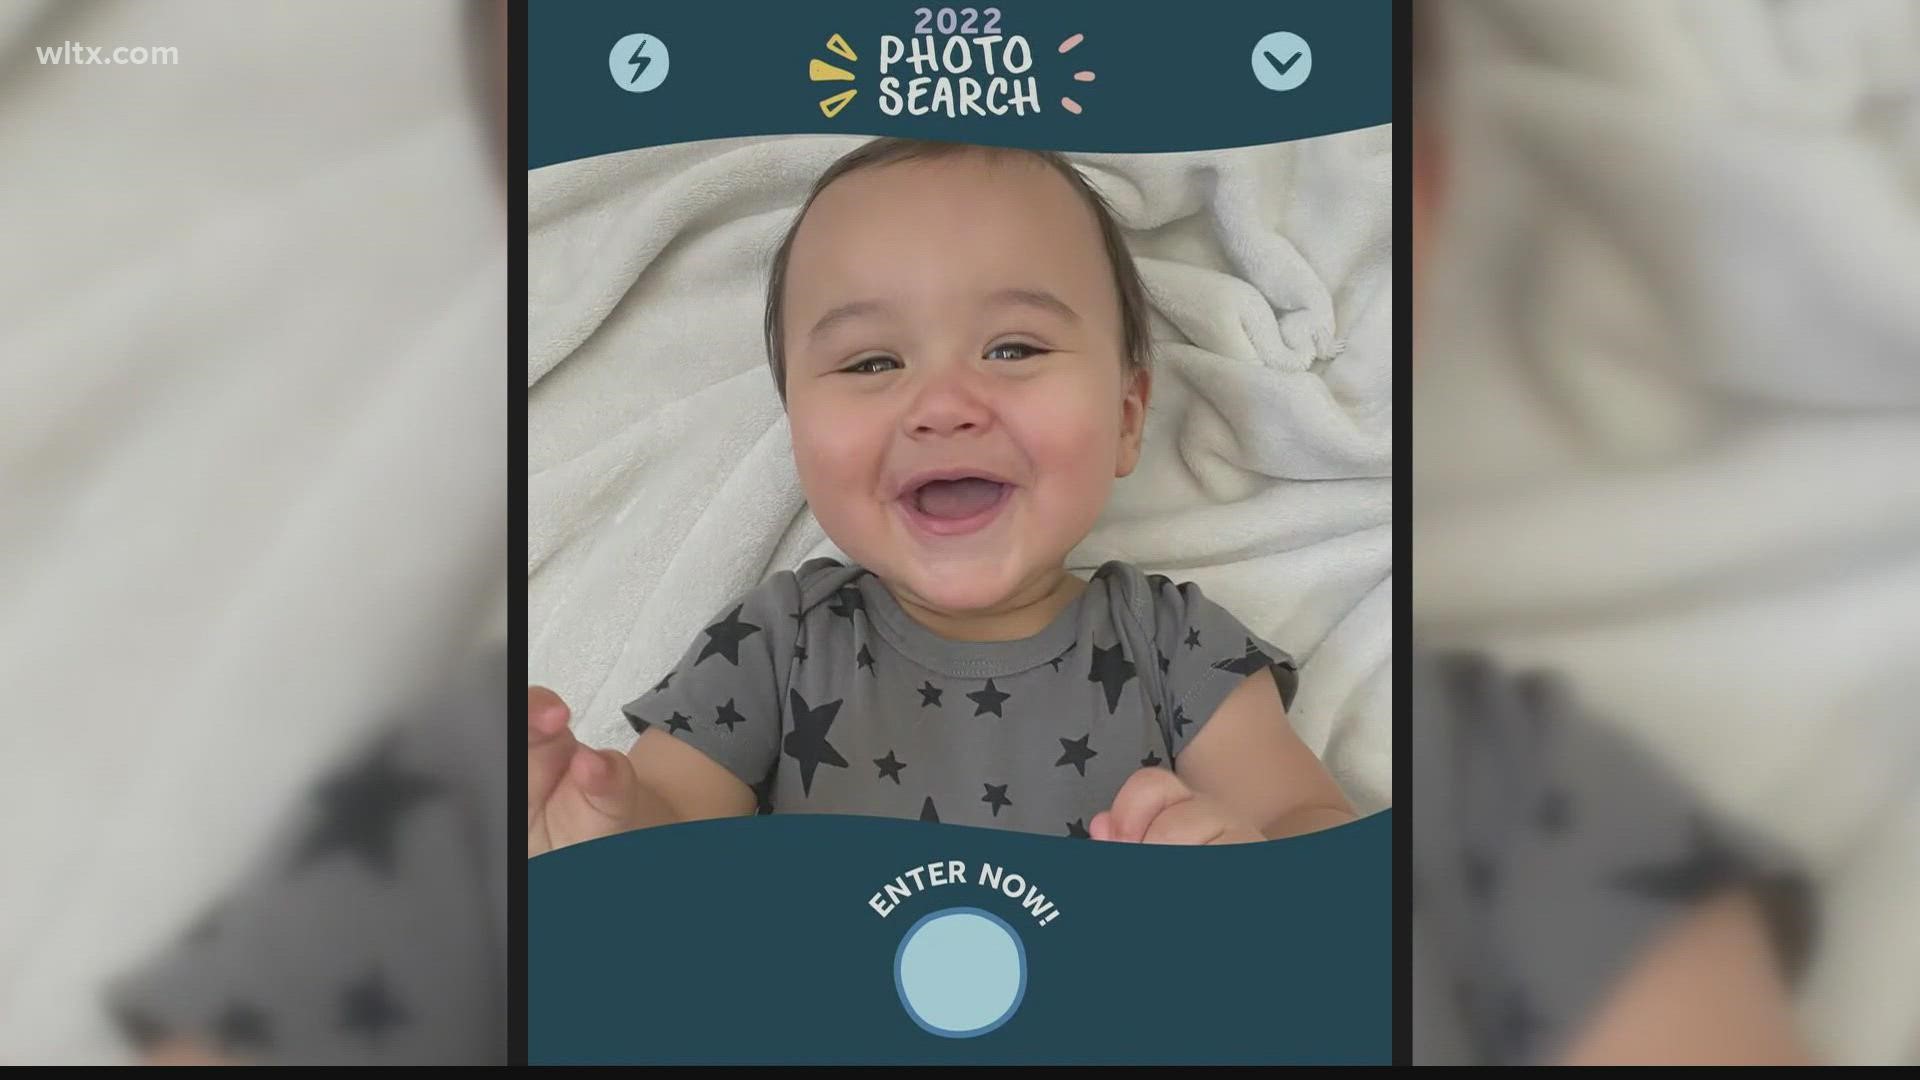 Gerber Baby Contest: Parent, baby photos wanted for 2023